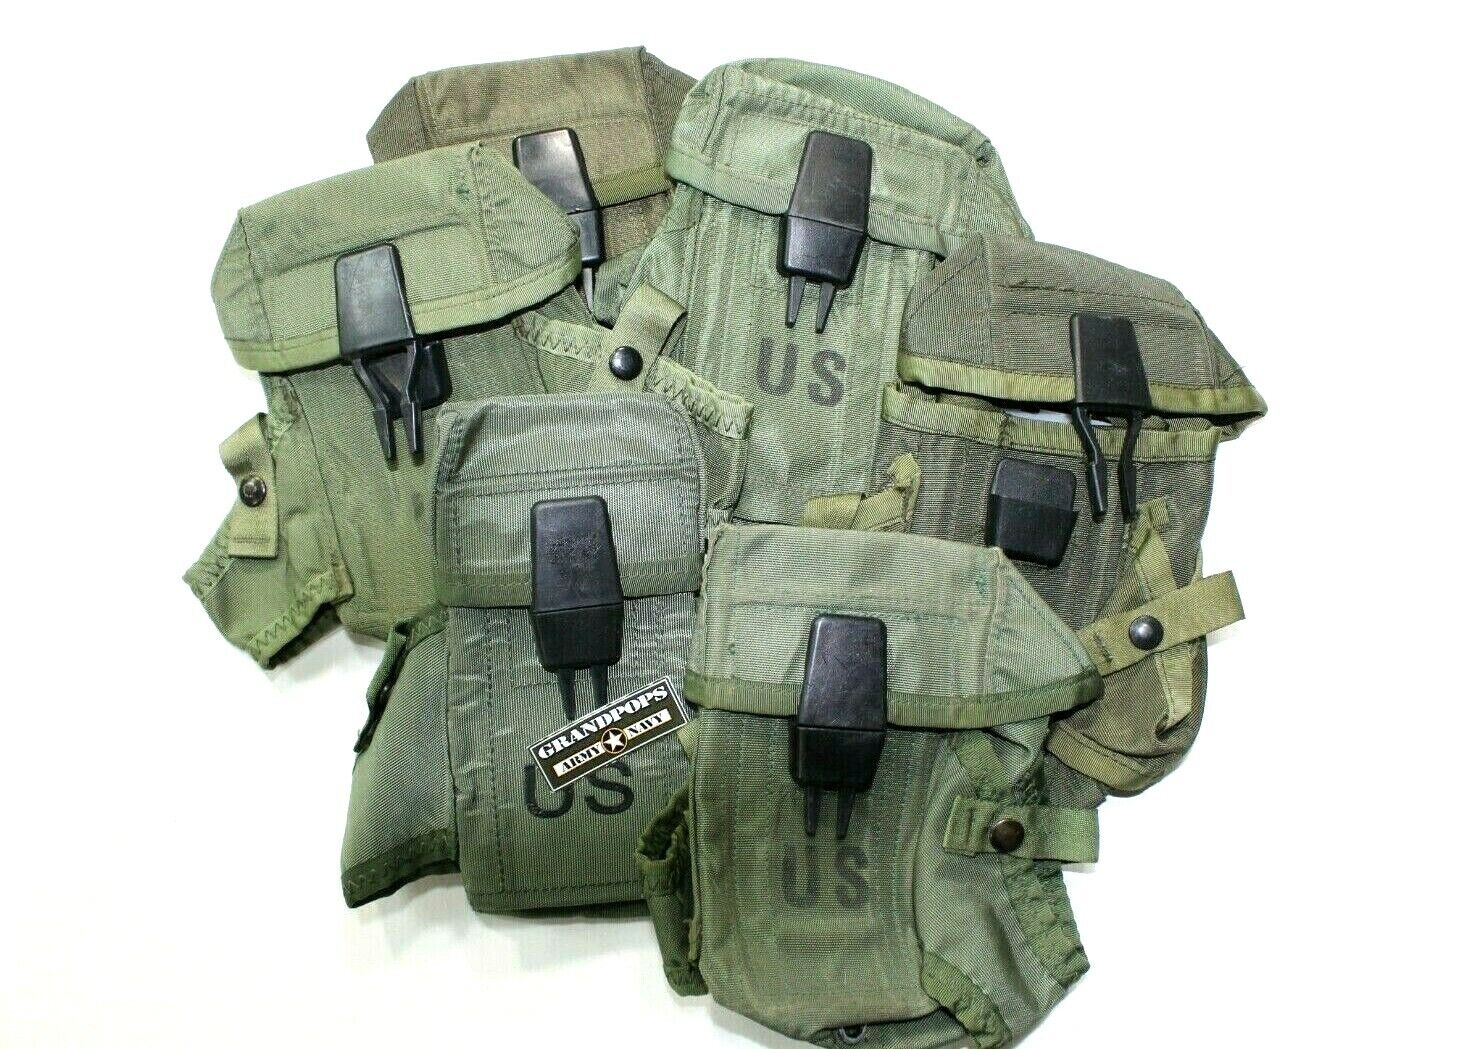 U.S. USED ORIGINAL O.D. GREEN ALICE SYSTEM 3 CELL M16 SURPLUS MAGAZINE POUCH 